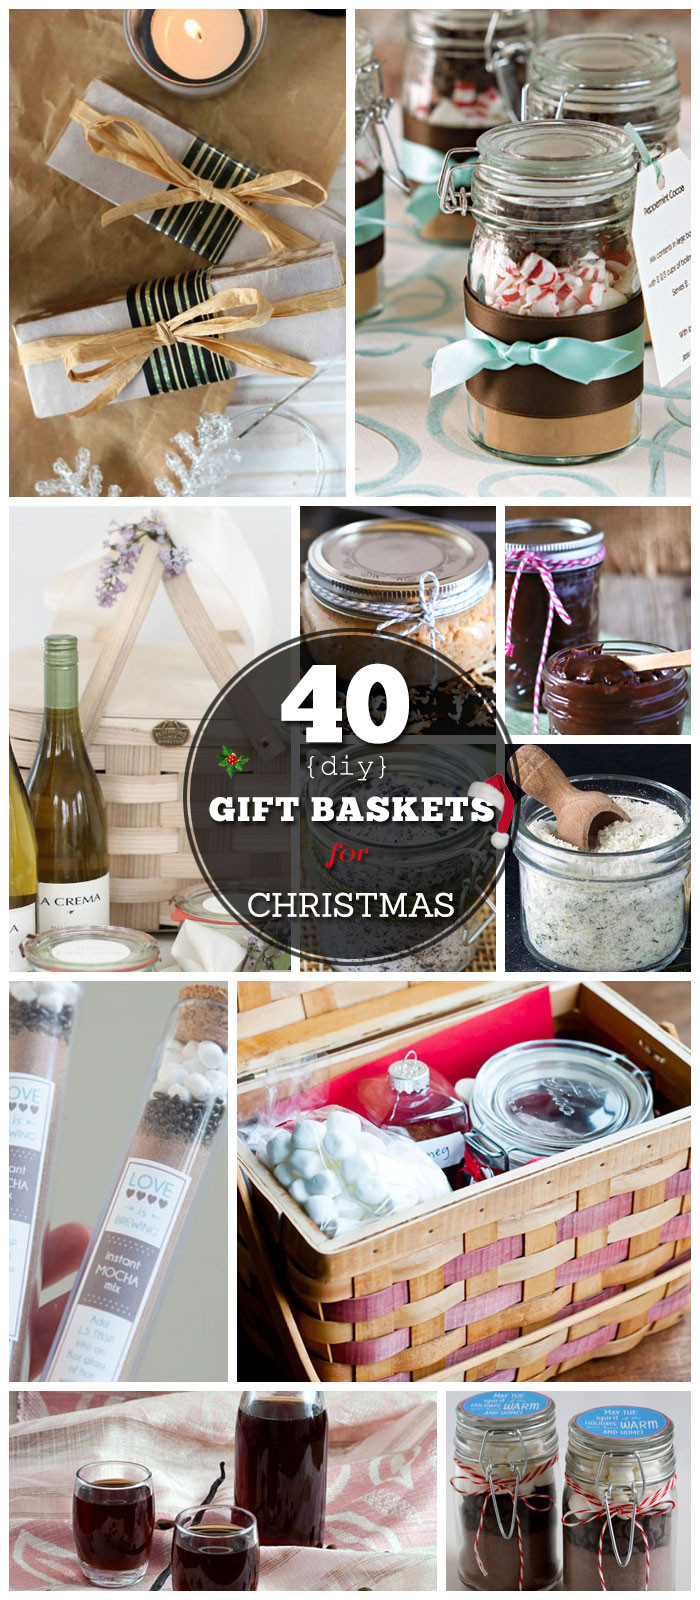 DIY Gift Baskets Ideas For Christmas
 30 Christmas Gift Baskets for All Your Loved es